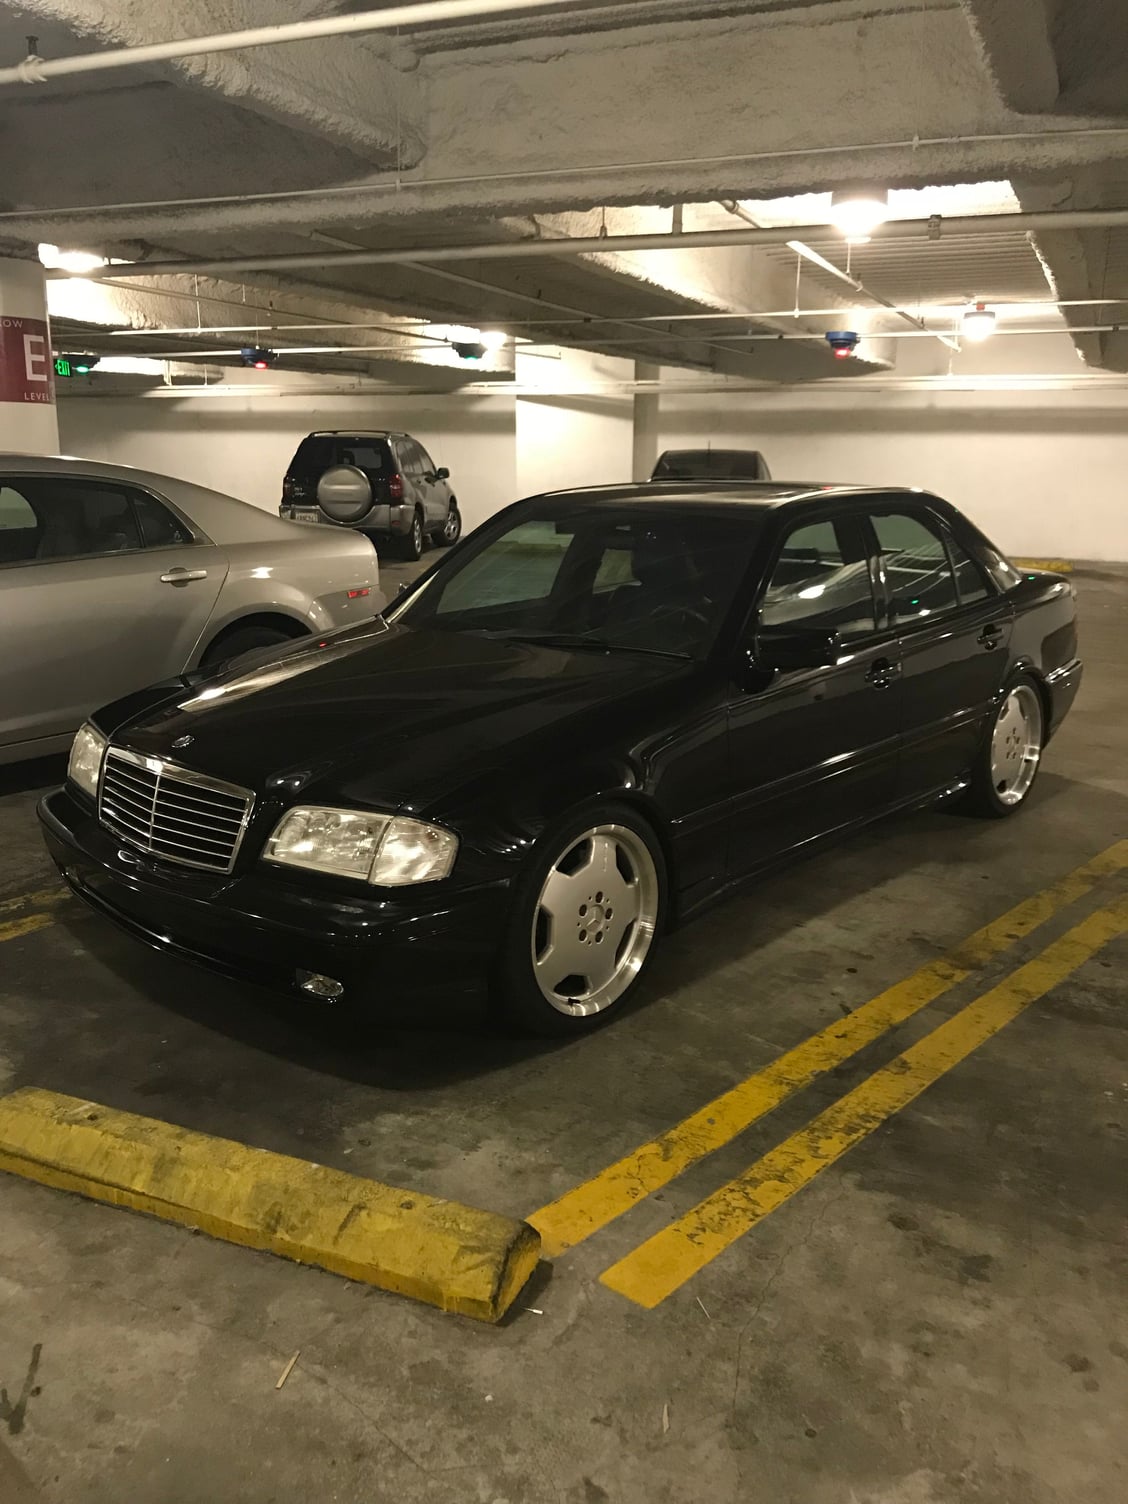 1998 Mercedes-Benz C43 AMG - FS or FT - 98 C43 with e55 engine swap, HPS supercharger and more! - Used - VIN 23928349238423939 - 8 cyl - 2WD - Automatic - Sedan - Black - Los Angeles, CA 90067, United States